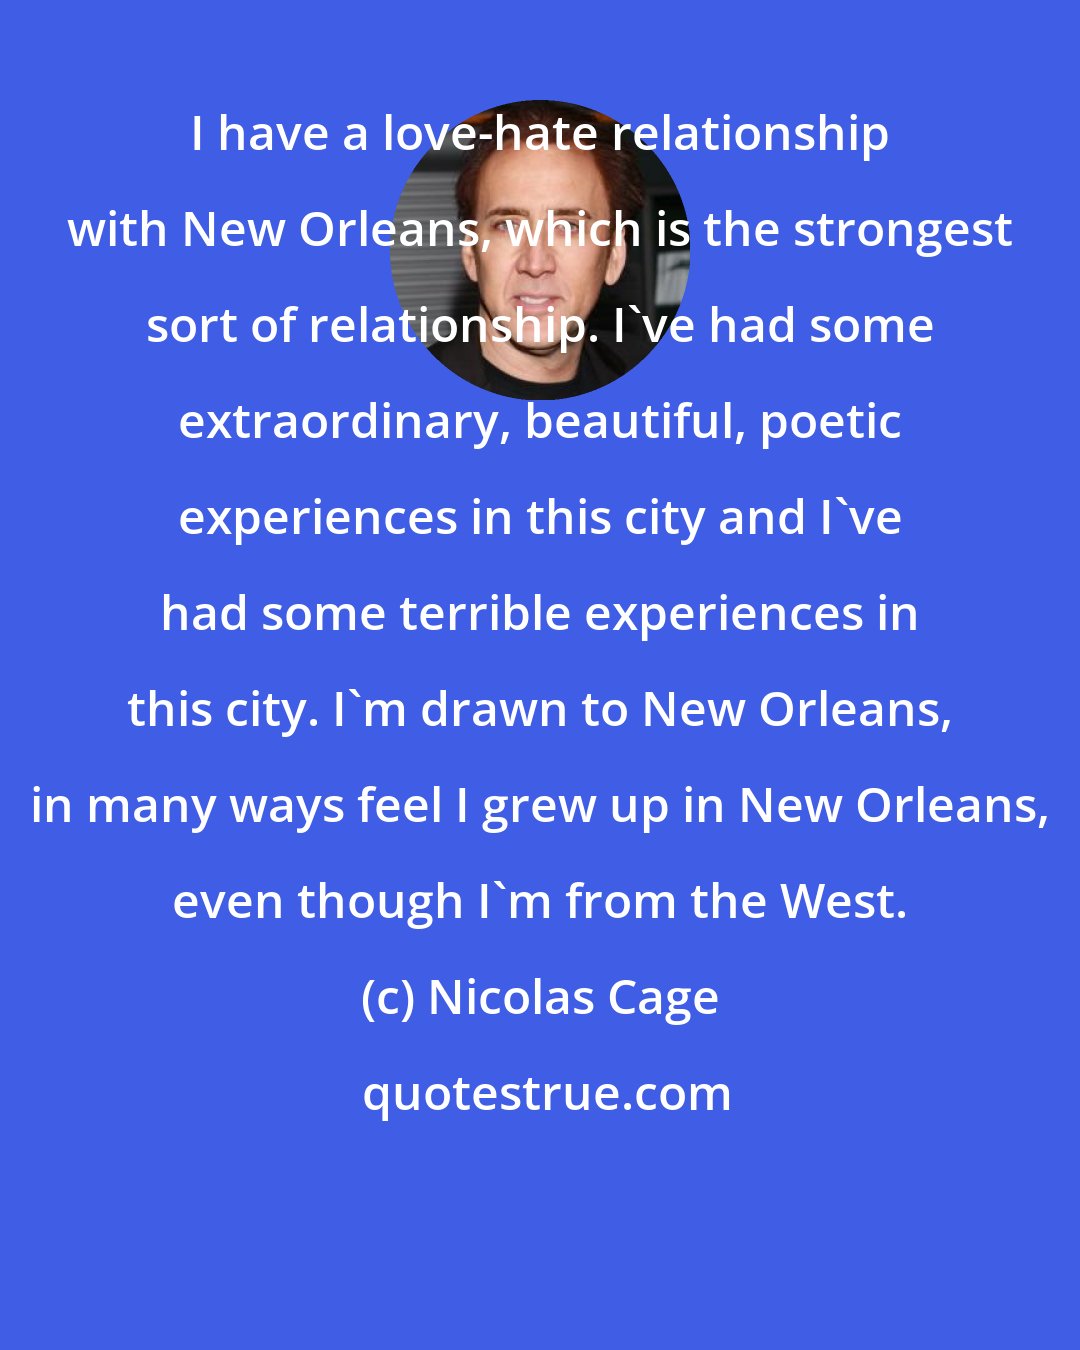 Nicolas Cage: I have a love-hate relationship with New Orleans, which is the strongest sort of relationship. I've had some extraordinary, beautiful, poetic experiences in this city and I've had some terrible experiences in this city. I'm drawn to New Orleans, in many ways feel I grew up in New Orleans, even though I'm from the West.